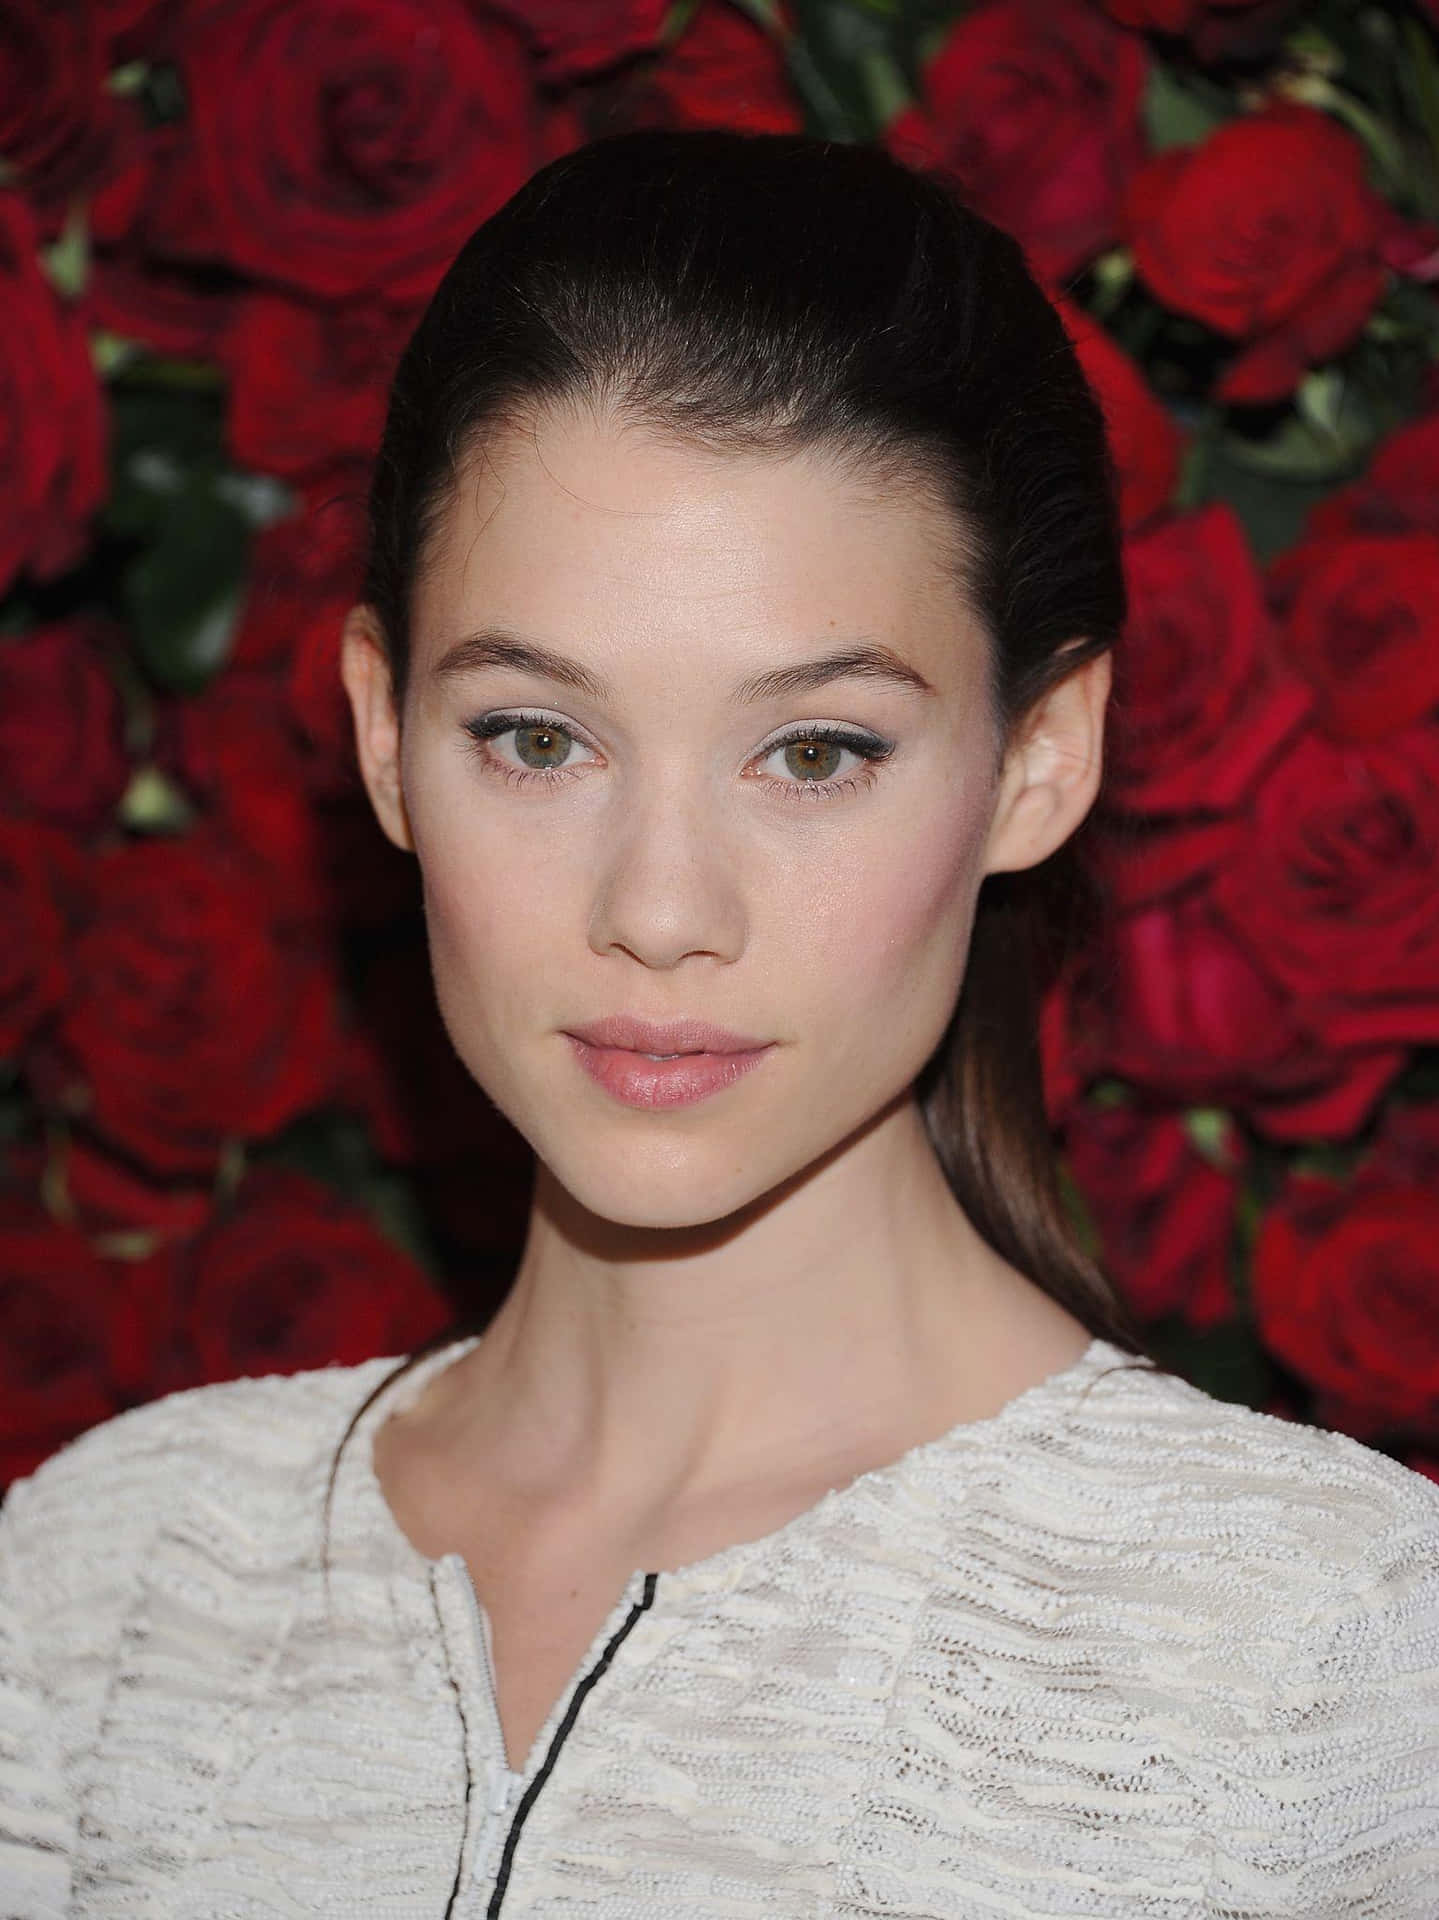 Astrid Berges Frisbey radiant in a portrait photo Wallpaper